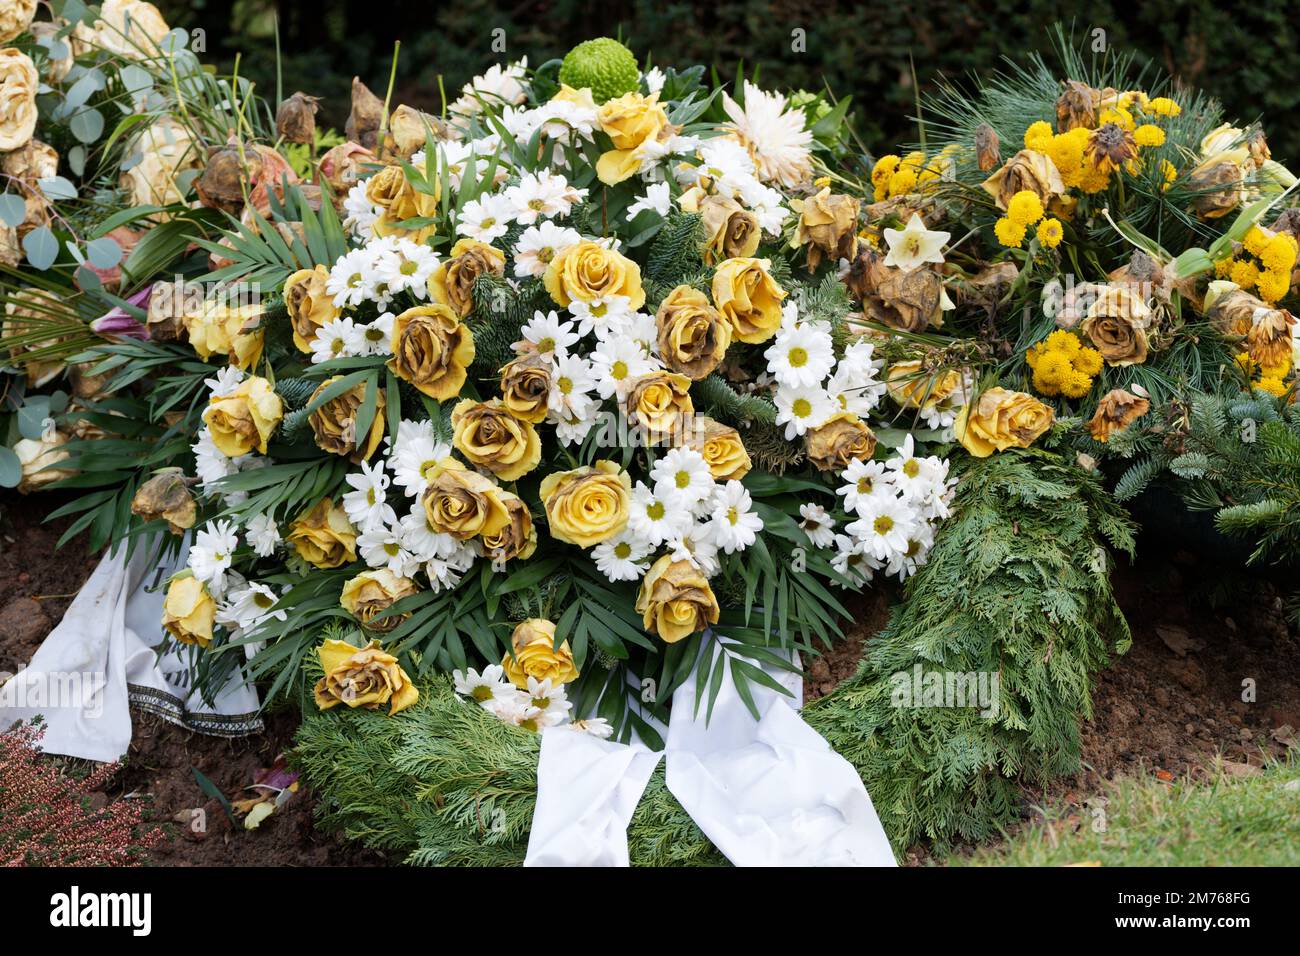 a funeral wreath with yellow roses and white gerbera begins to wilt Stock Photo